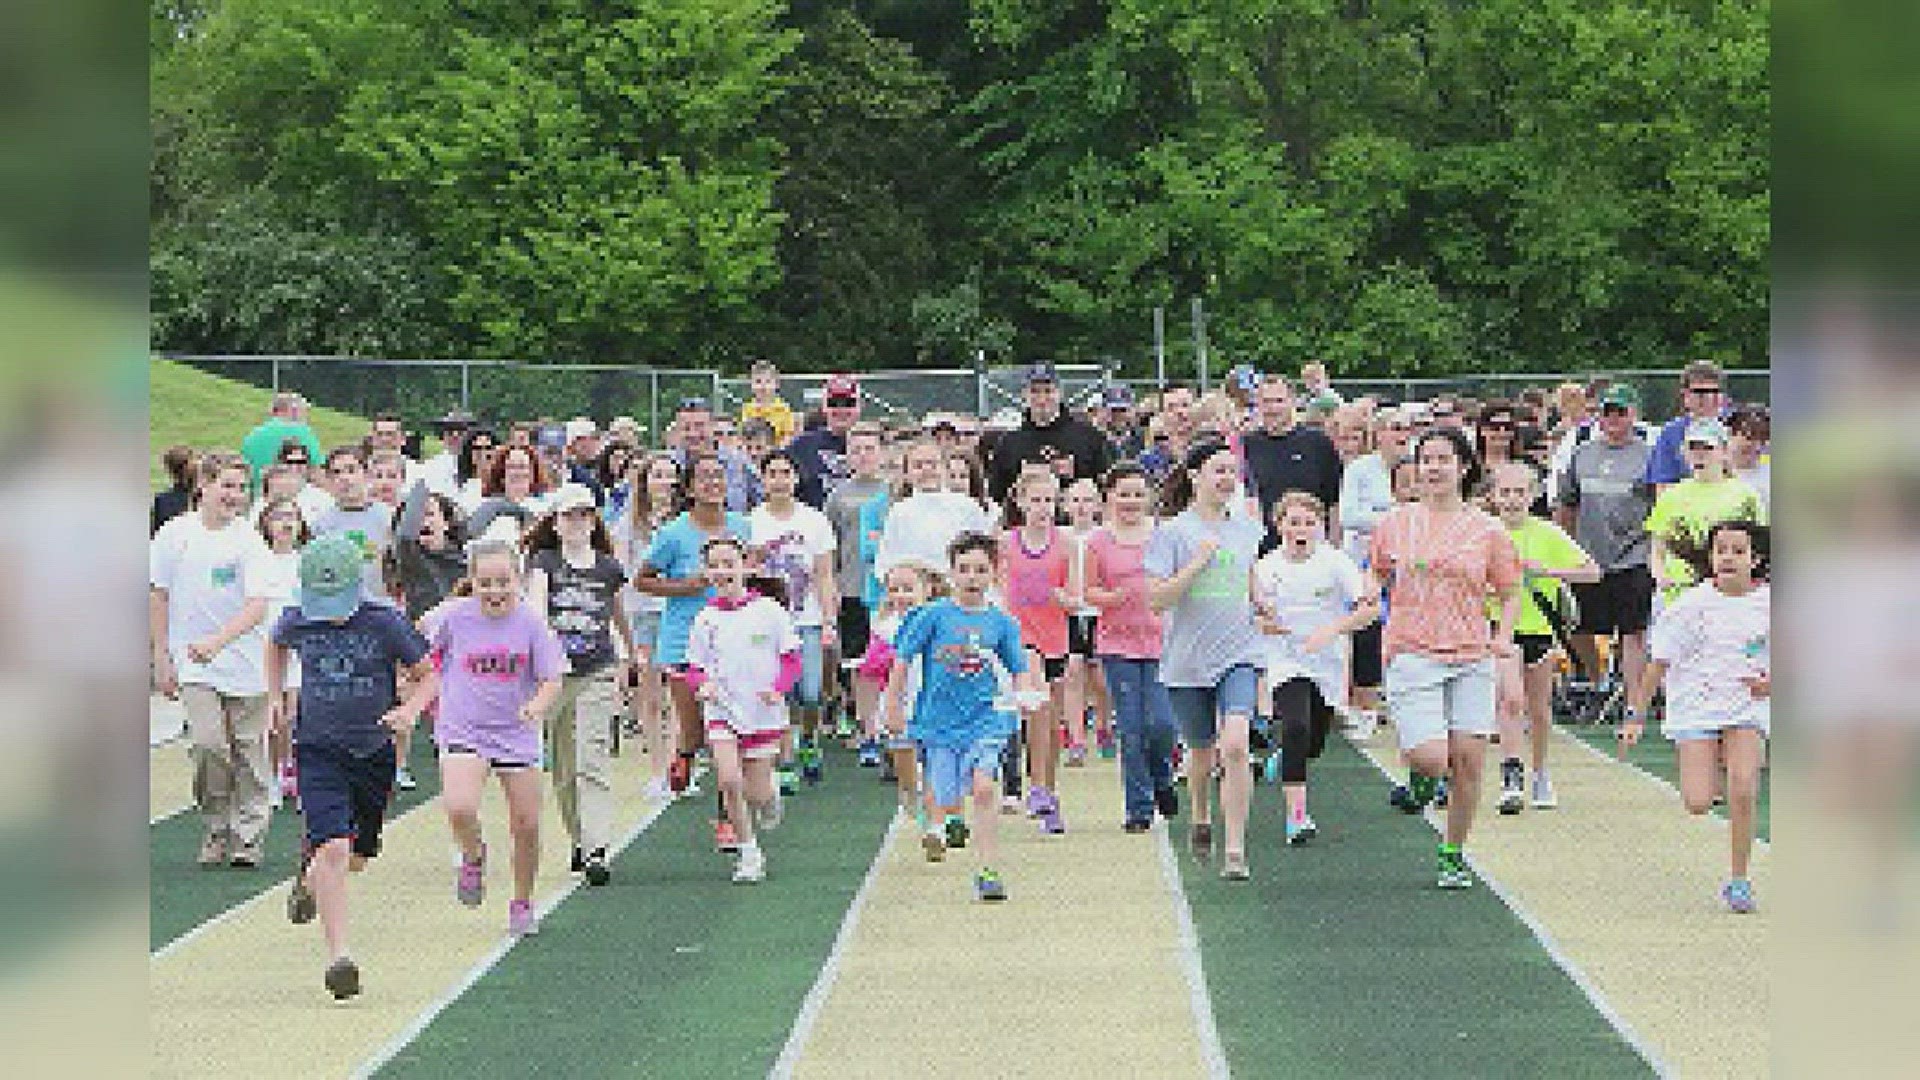 Kids Helping Kids Fun Walk(benefits Catholic Charities of East Tennessee and Columbus Home_Sun., May 7, 20171 to 3:30 PM Knoxville Catholic High School9245 Fox Lonas Road NorthwestRegister at: ccetn.orgMay 3, 2017-Live at Five at 4